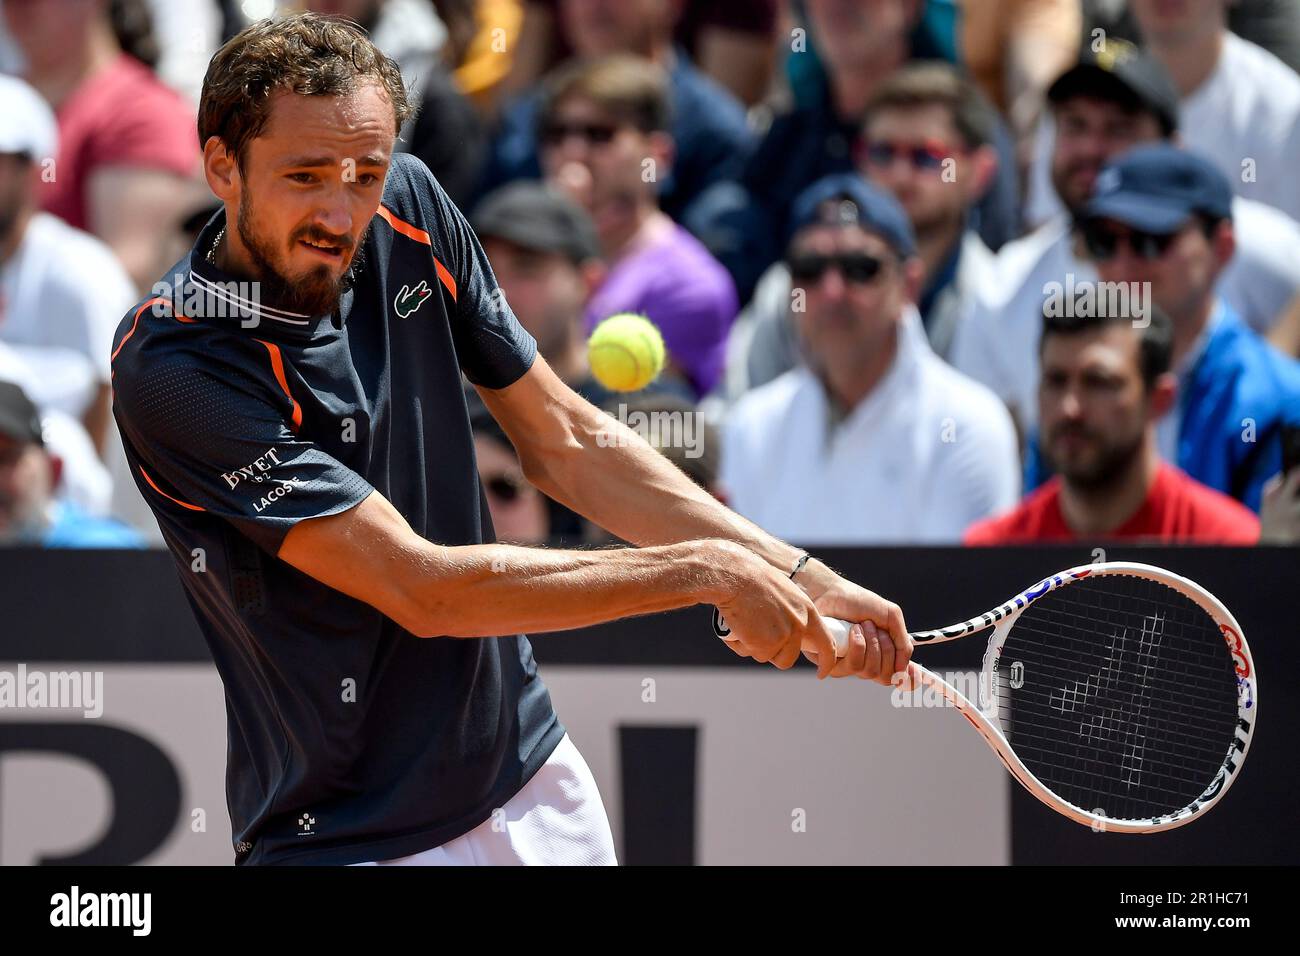 Rome, Italy. 14th May, 2023. Daniil Medvedev of Russia in action during his match against Emil Ruusuvuori of Finland at the Internazionali BNL d'Italia tennis tournament at Foro Italico in Rome, Italy on May 14th, 2023. Credit: Insidefoto di andrea staccioli/Alamy Live News Stock Photo